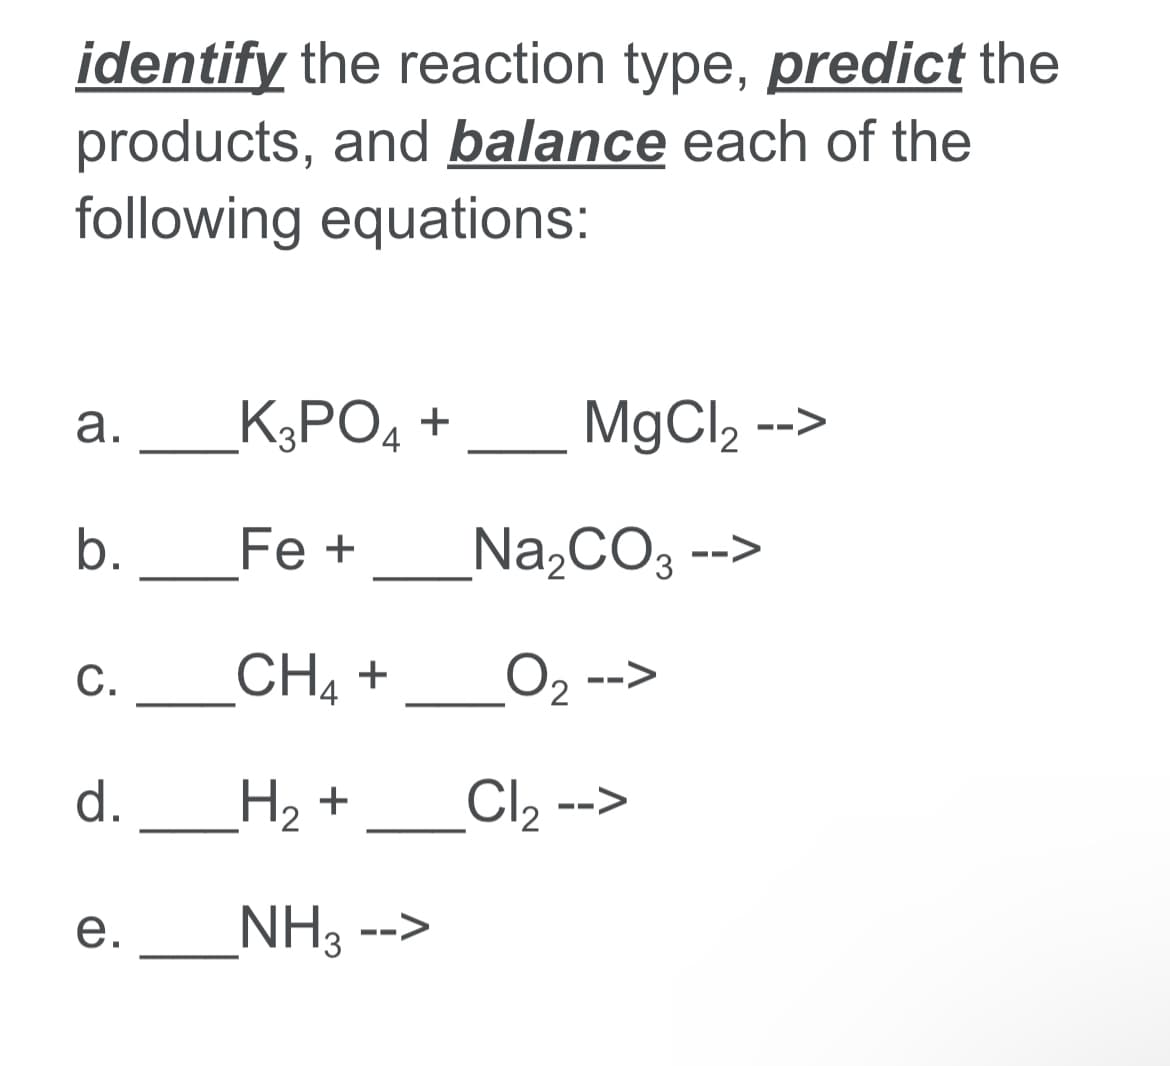 identify the reaction type, predict the
products, and balance each of the
following equations:
K3PO4 +
MgCl2 -->
а.
b.
Fe +
Na,CO -
-->
_CH4 +
O2 -->
С.
d._H2 +
Cl2 -->
_NH3 -->
e.
